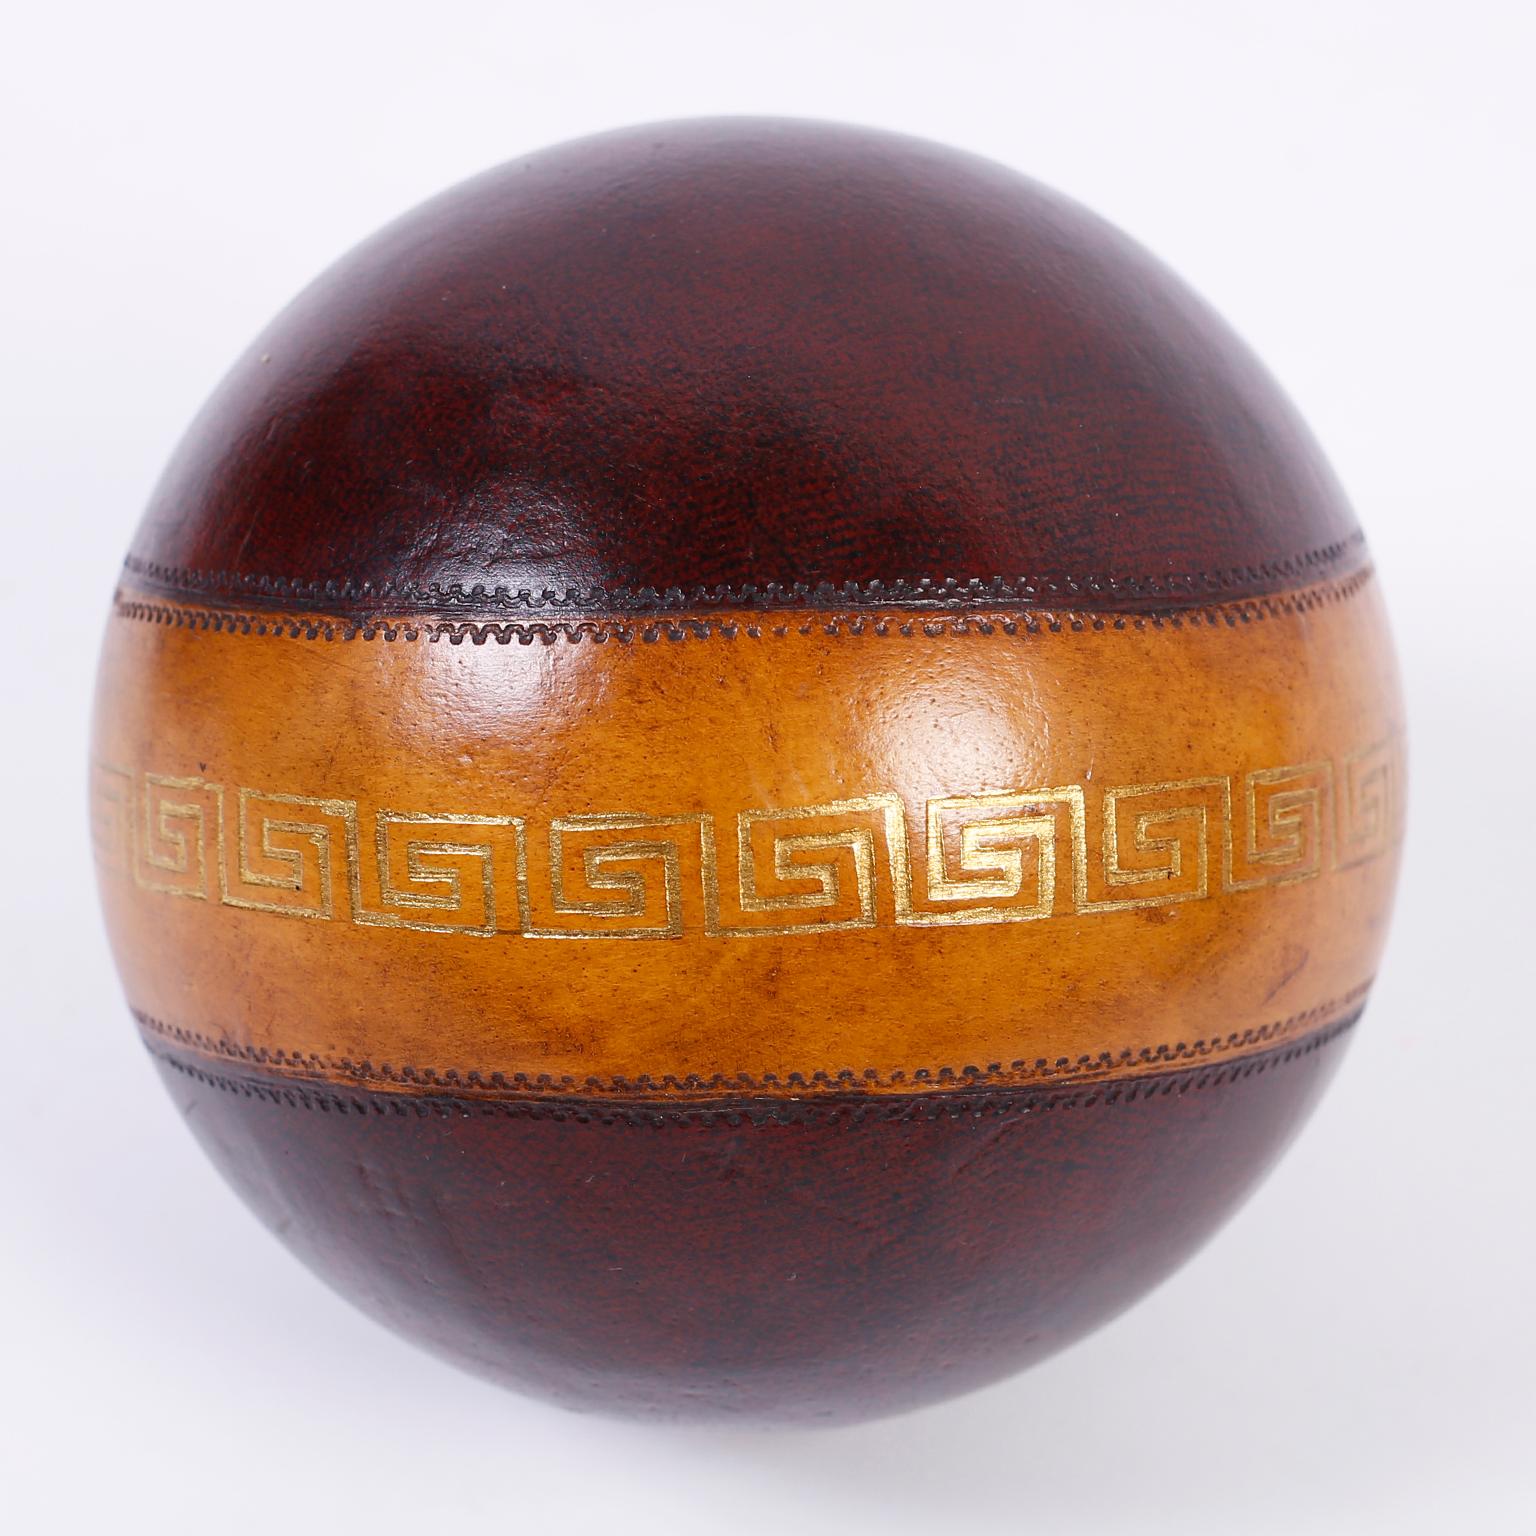 Intriguing set of six decorative bocce or lawn balls with a variety of colors and patterns, featuring embossed gold leaf decorations including Greek key and fleur de lis.